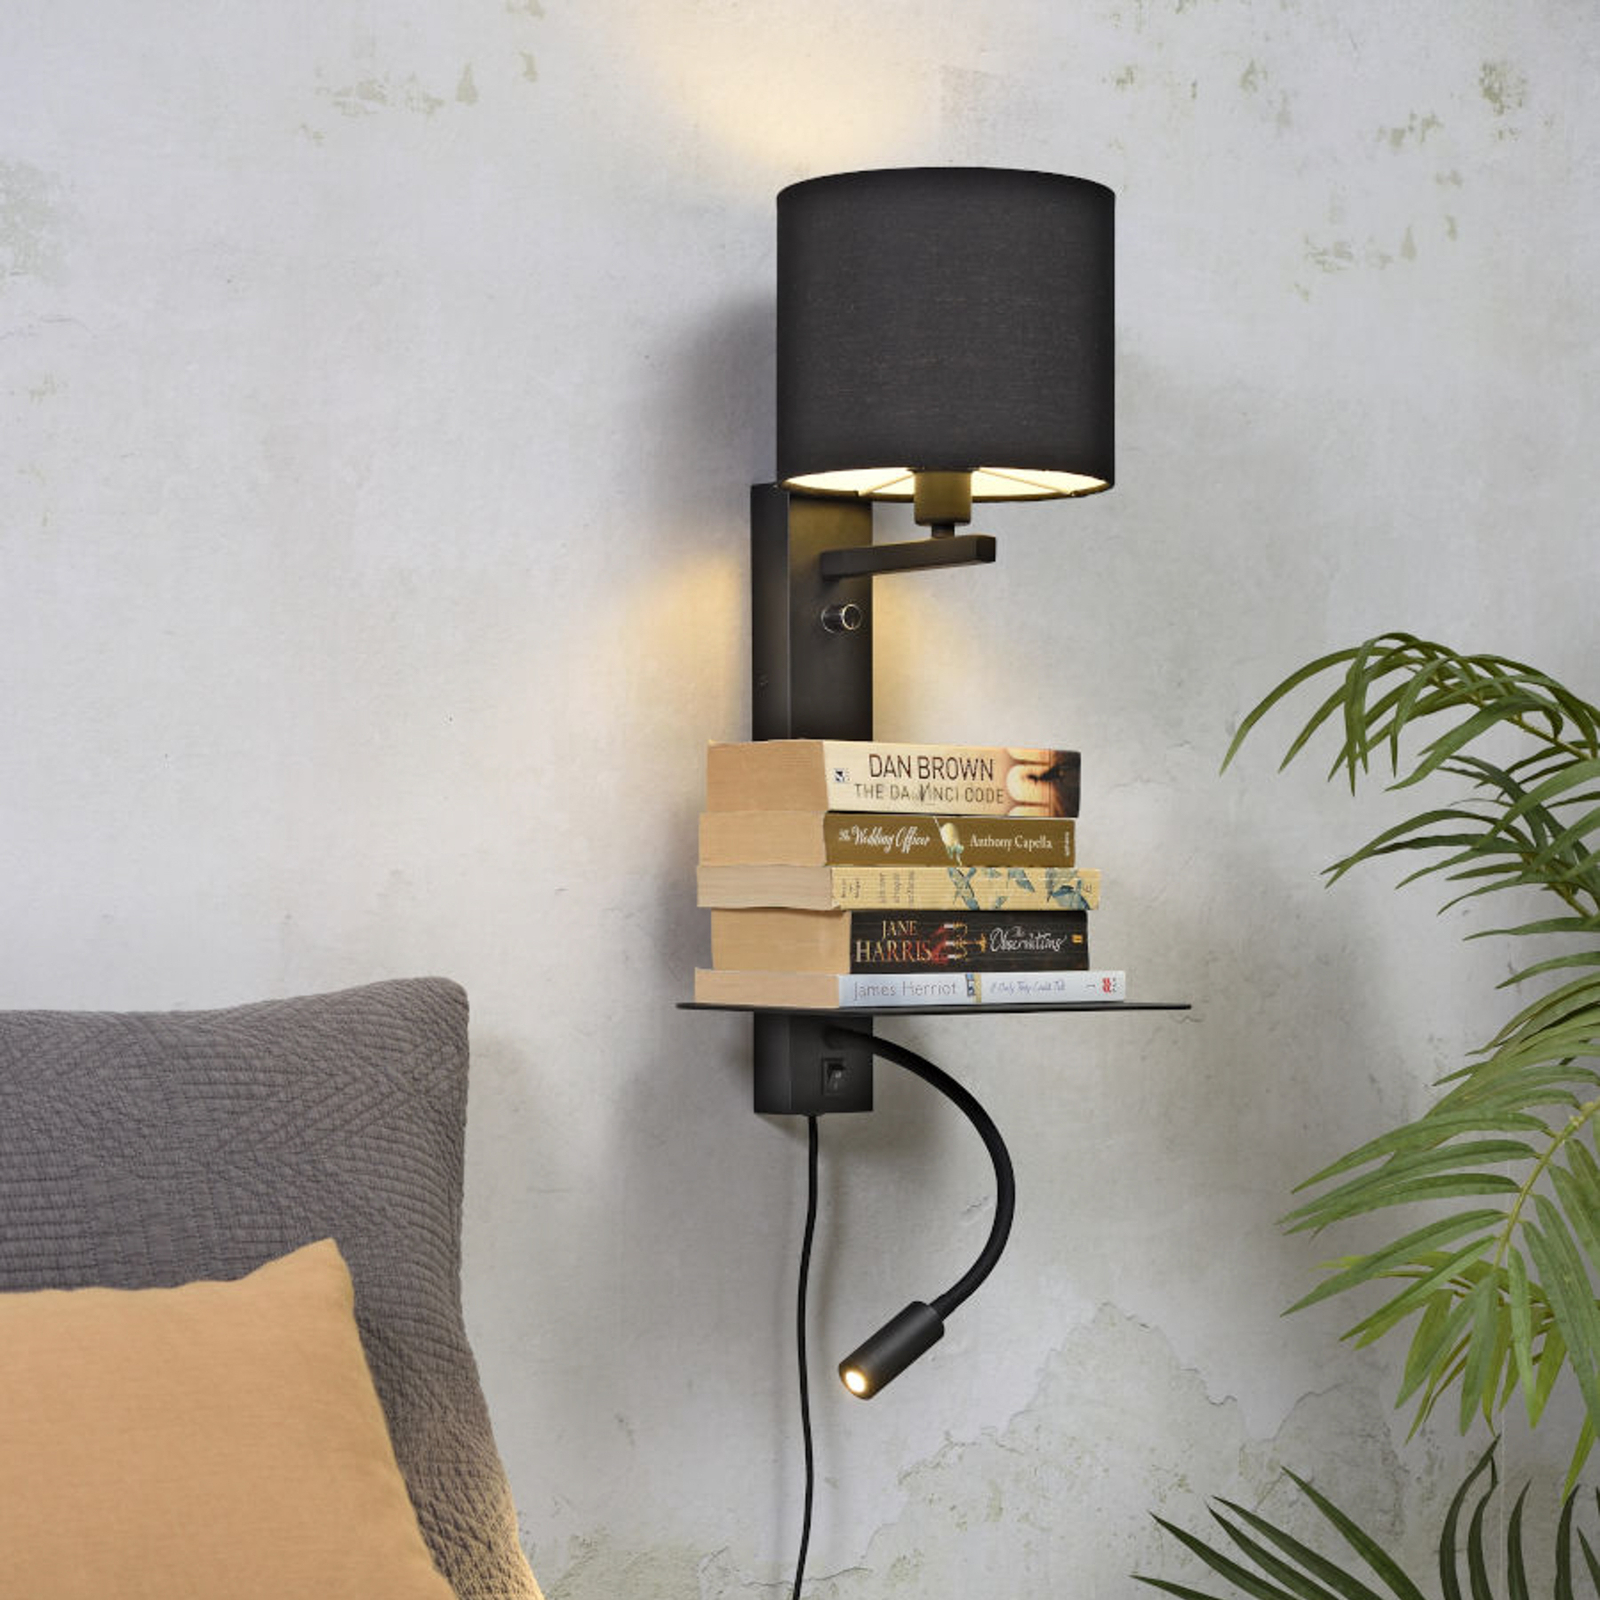 It’s about RoMi Florence reading lamp 2-bulb black